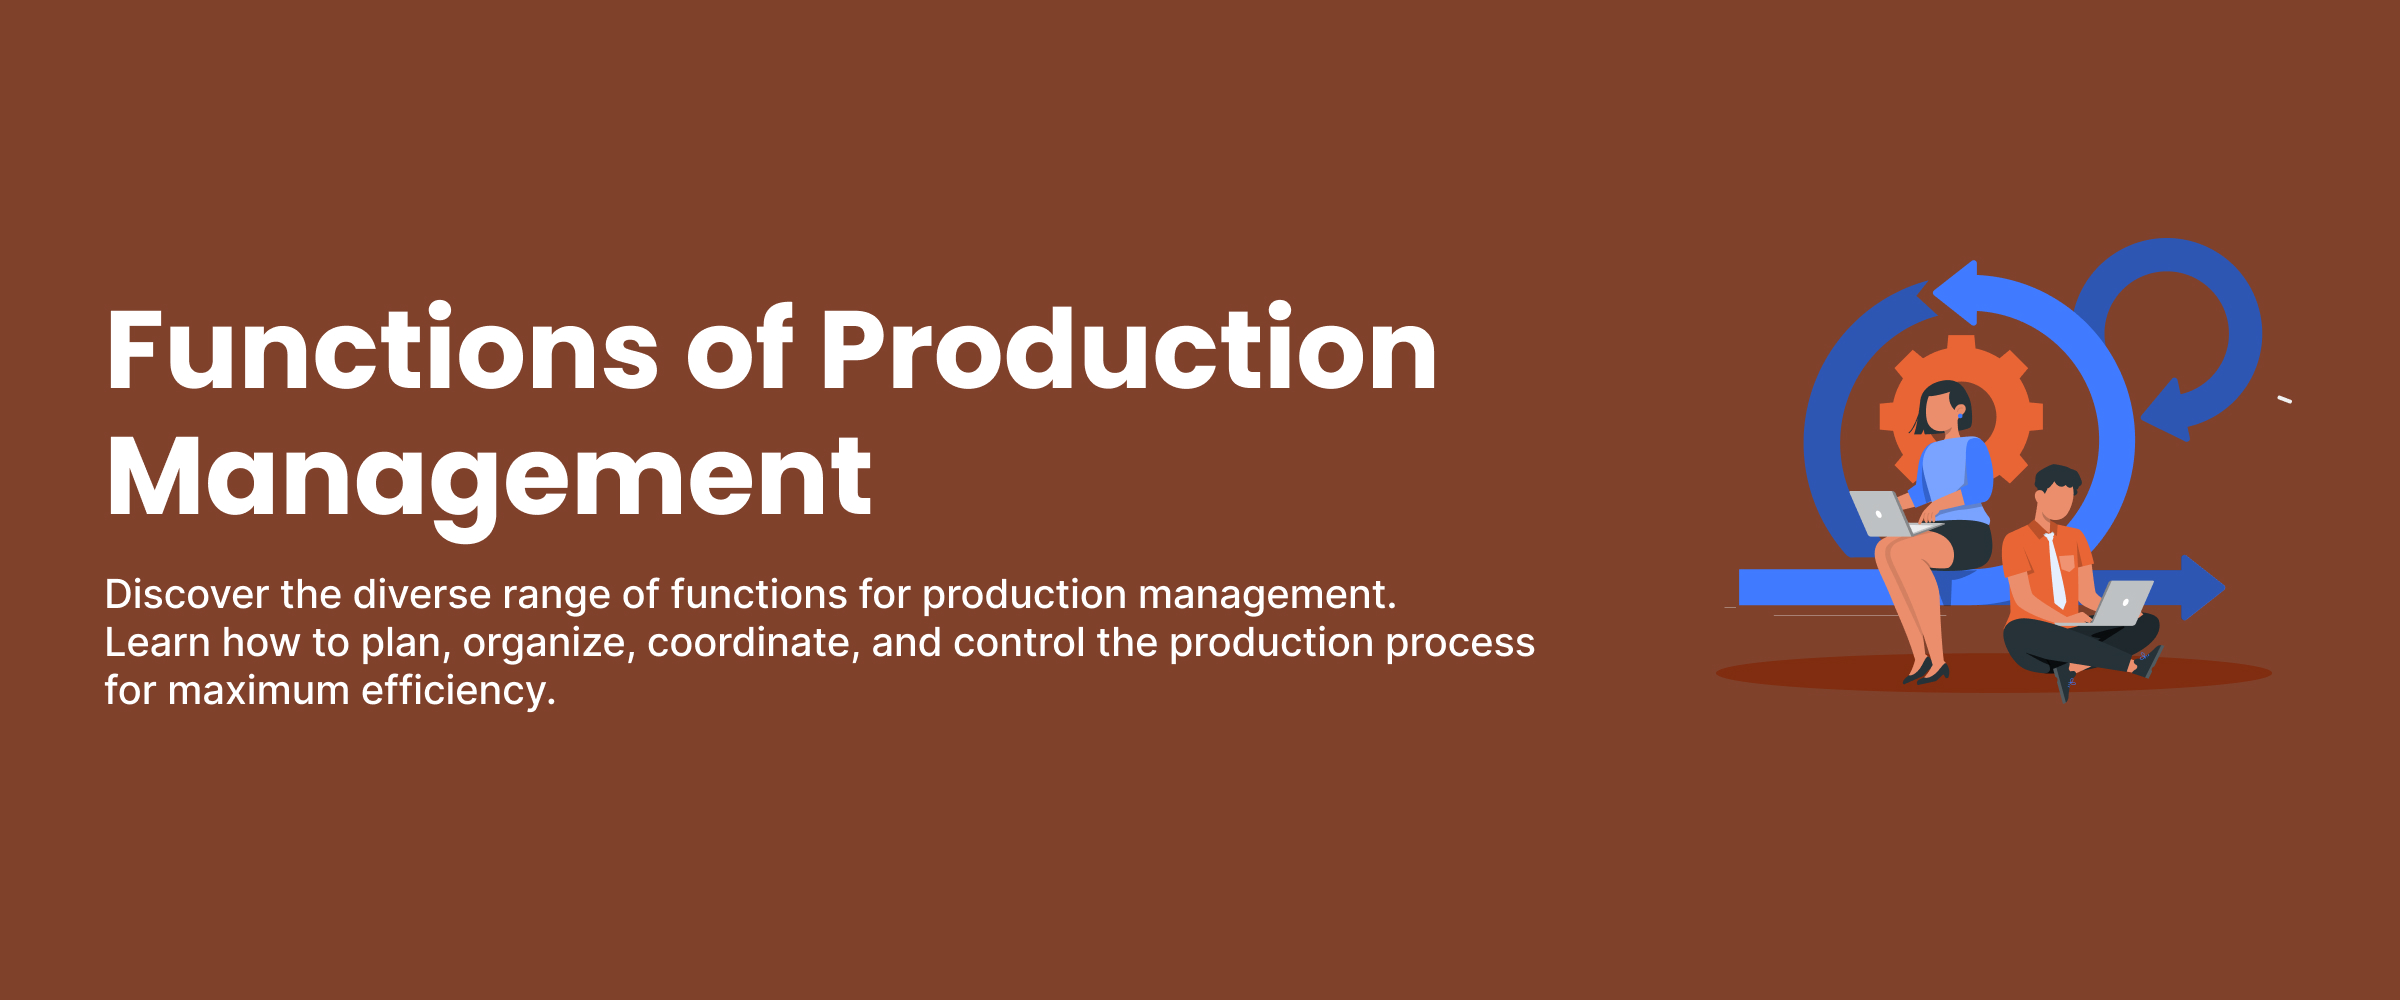 Functions of Production Management